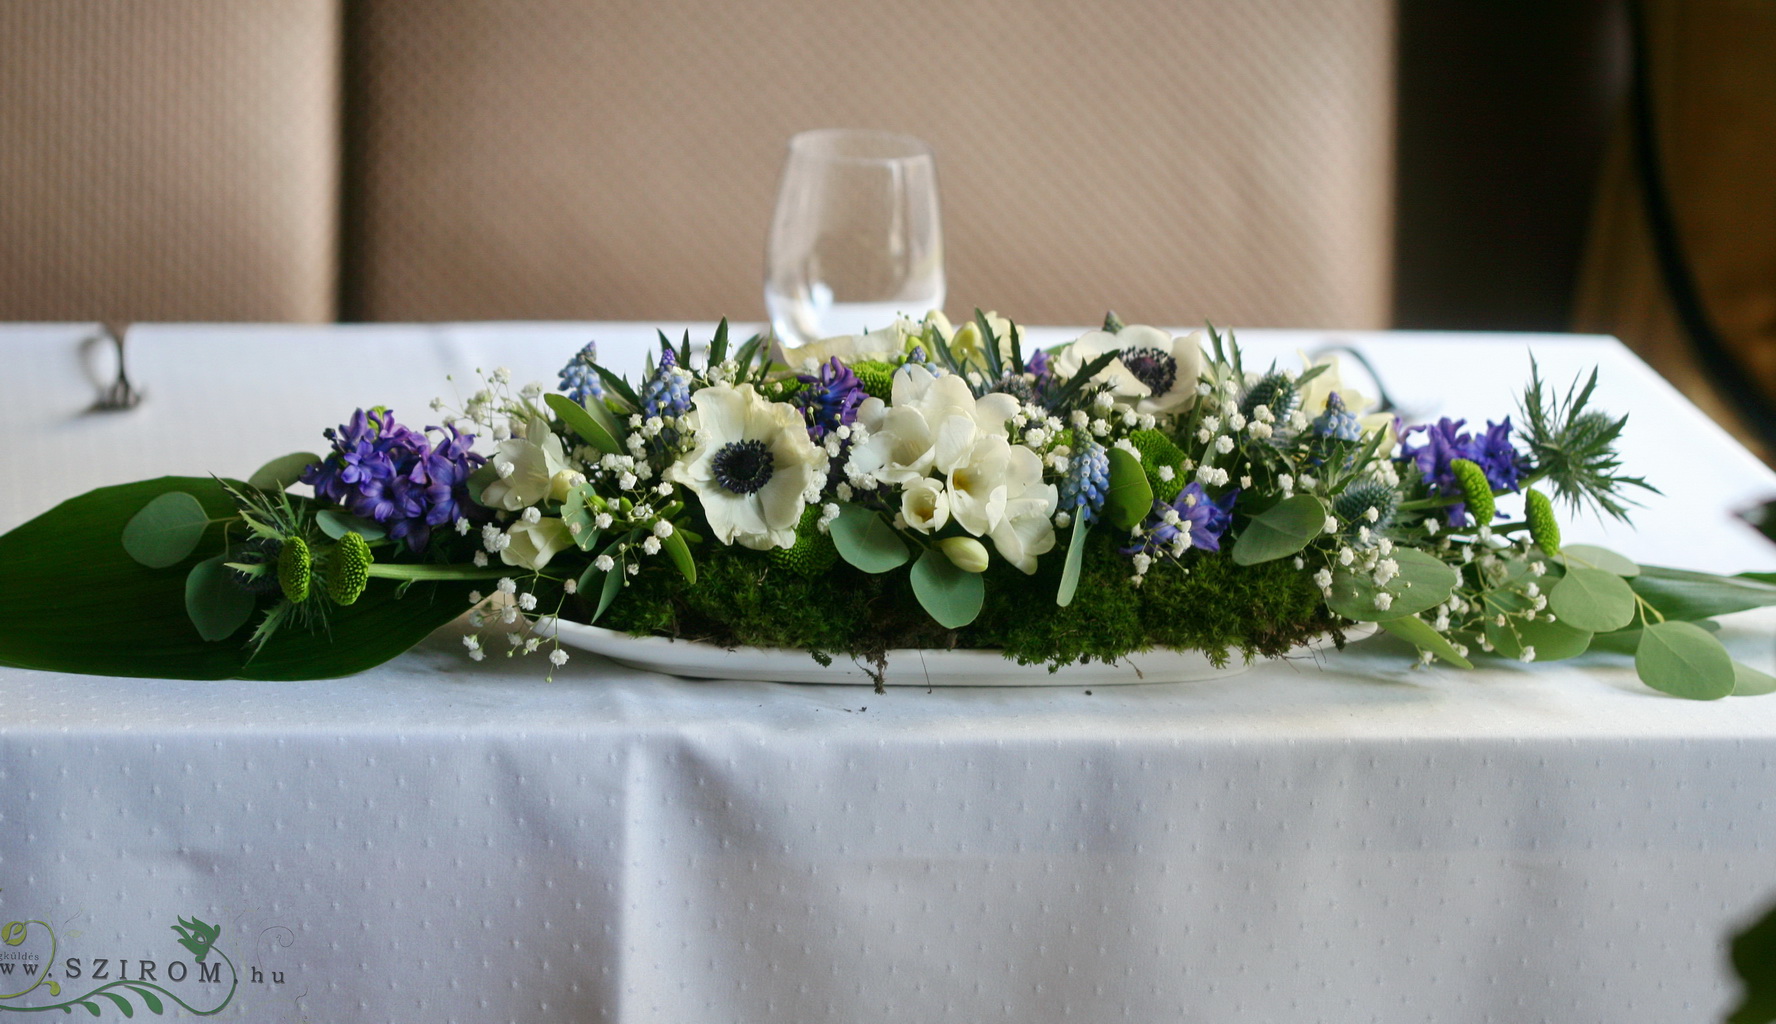 flower delivery Budapest - Main table centerpiece with spring flowers, moss, Mezzo Music (hyacinth, anemone, thistle, wild flowers, freesia, blue, white), wedding